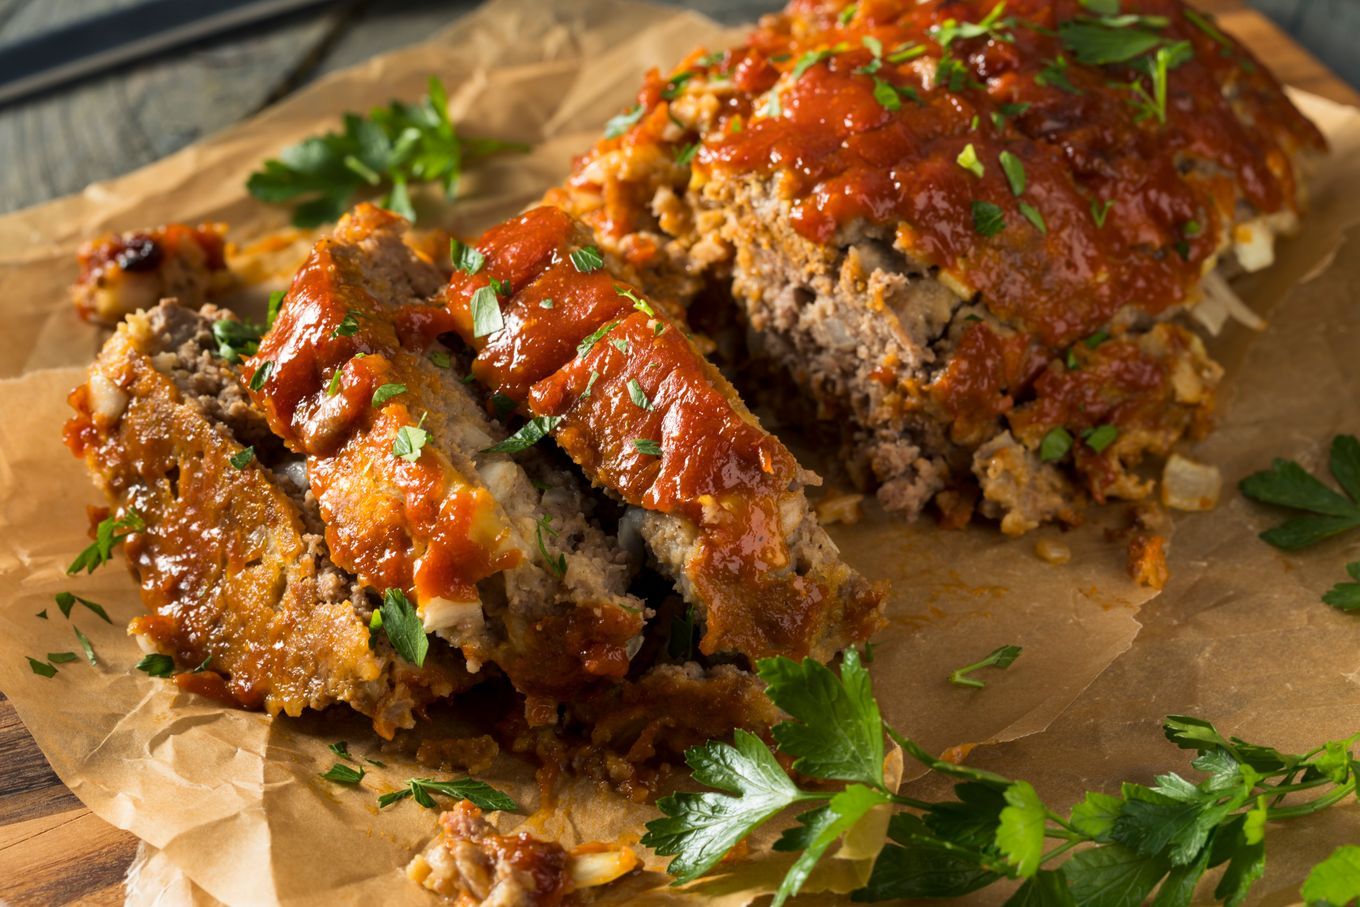 Nice and hearty: meatloaf is a traditional German dish